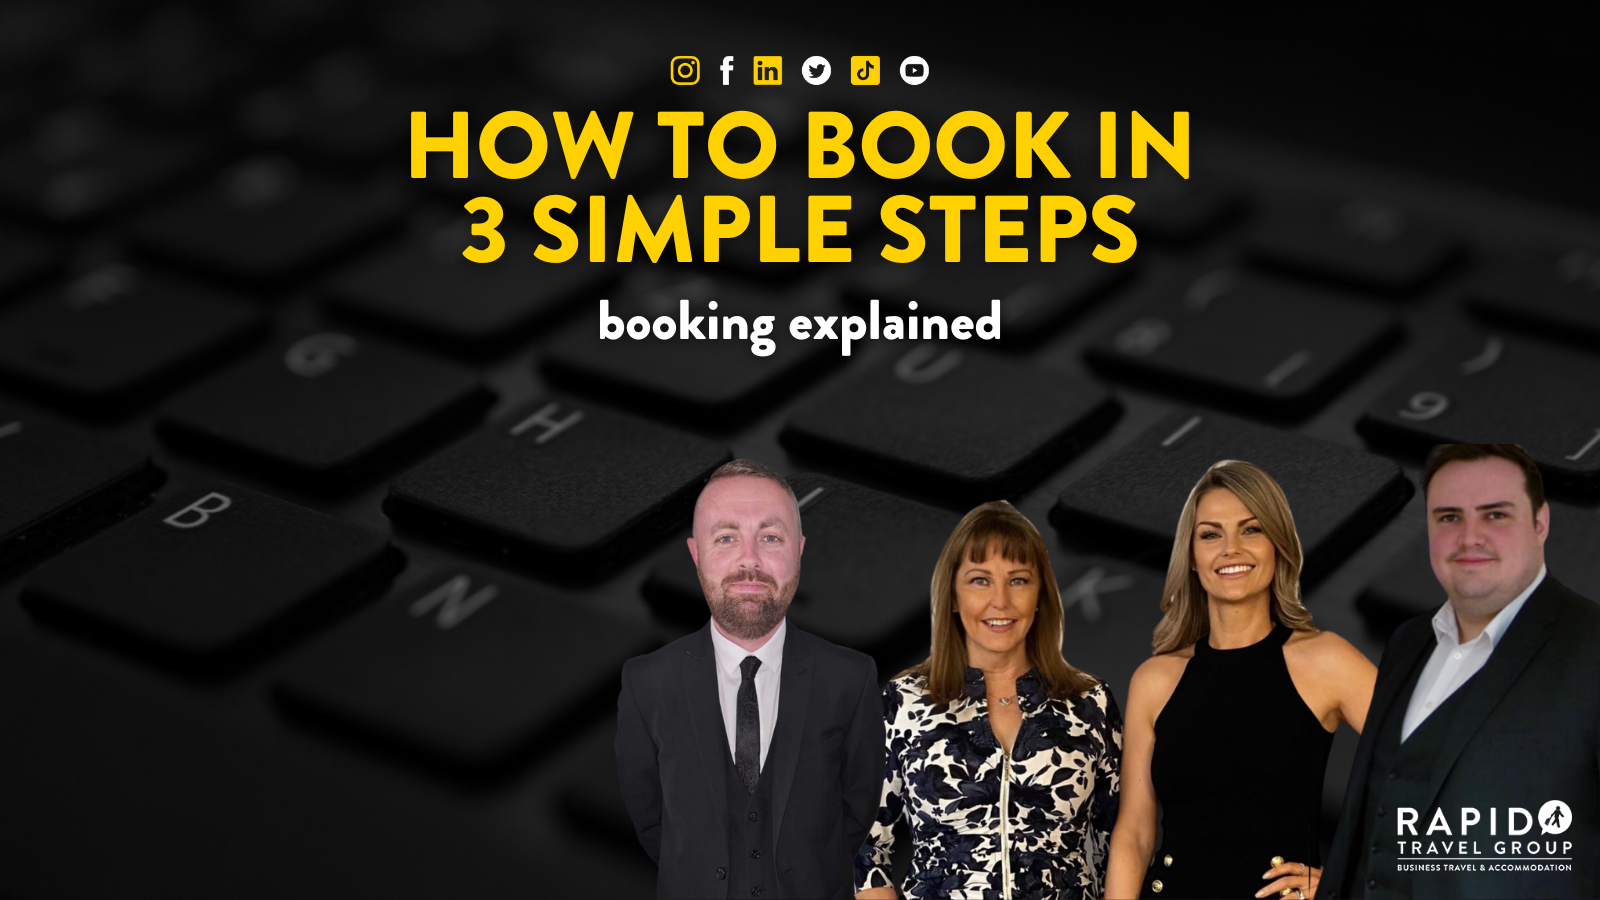 How to book in 3 simple steps